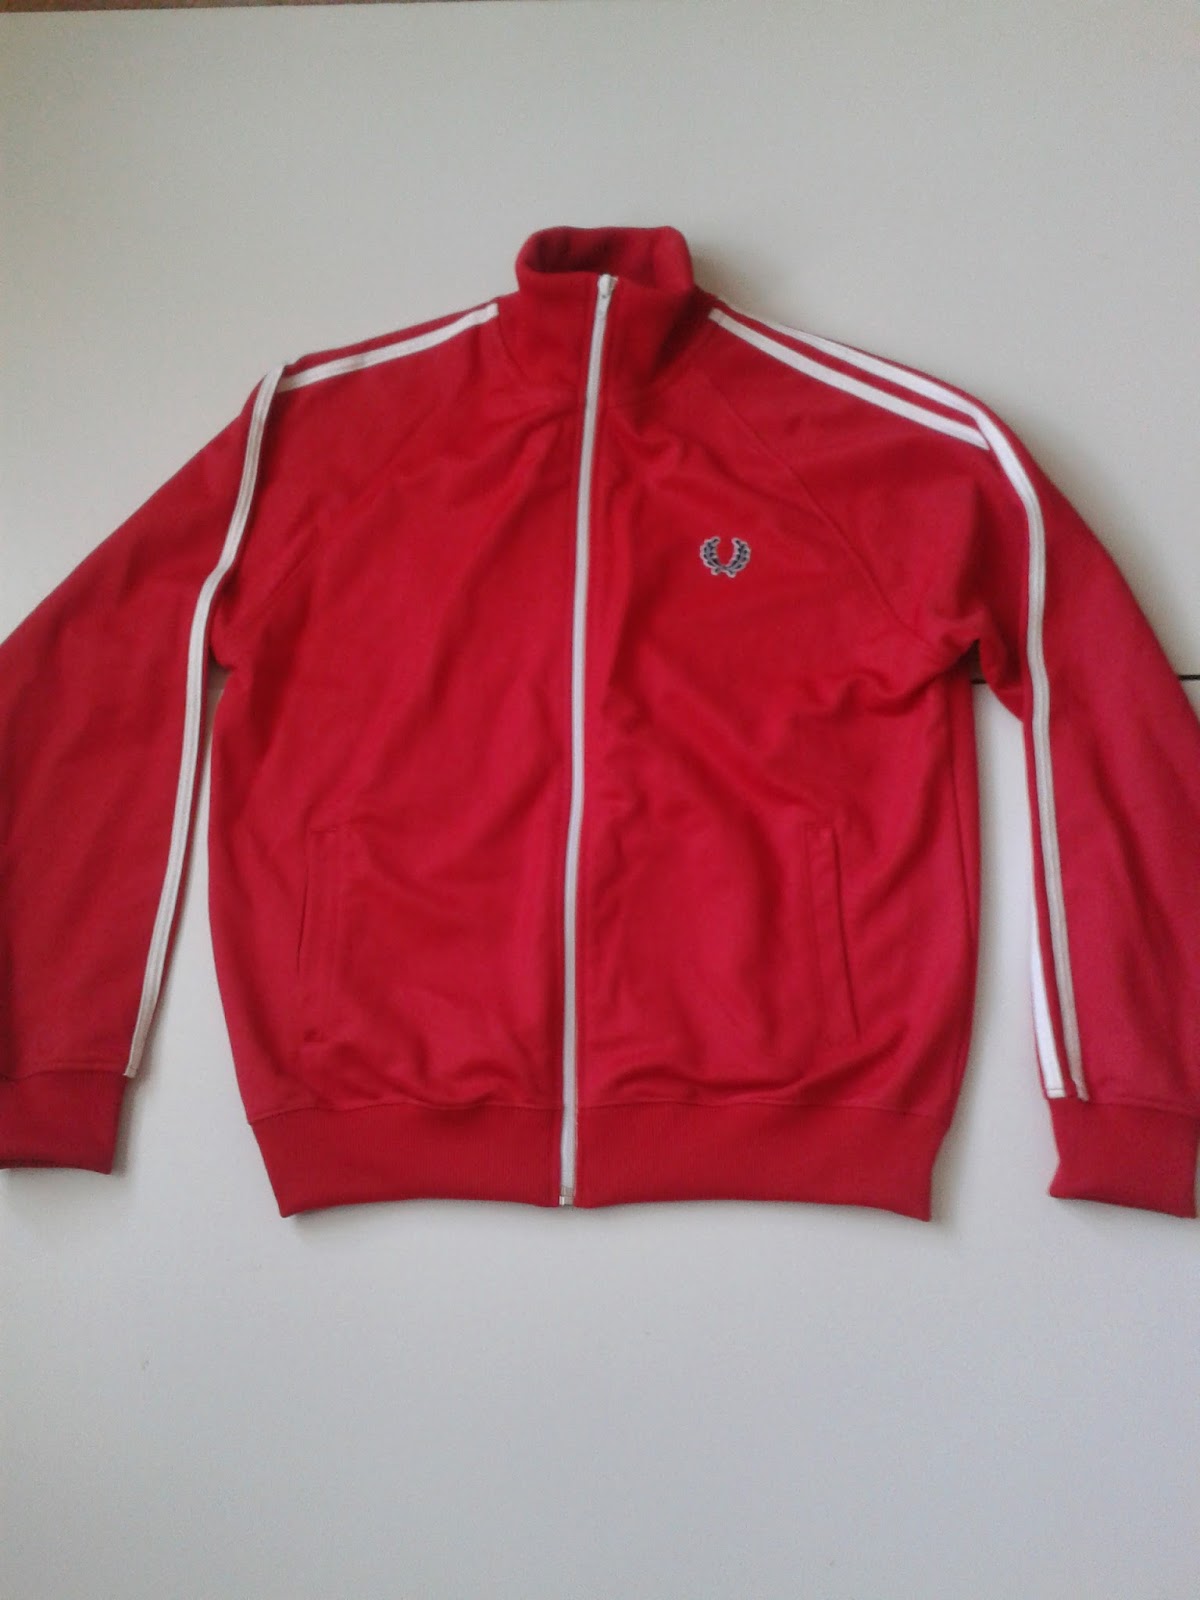 Gama Clothing Presents!: FRED PERRY TRACK TOP - SECOND HAND